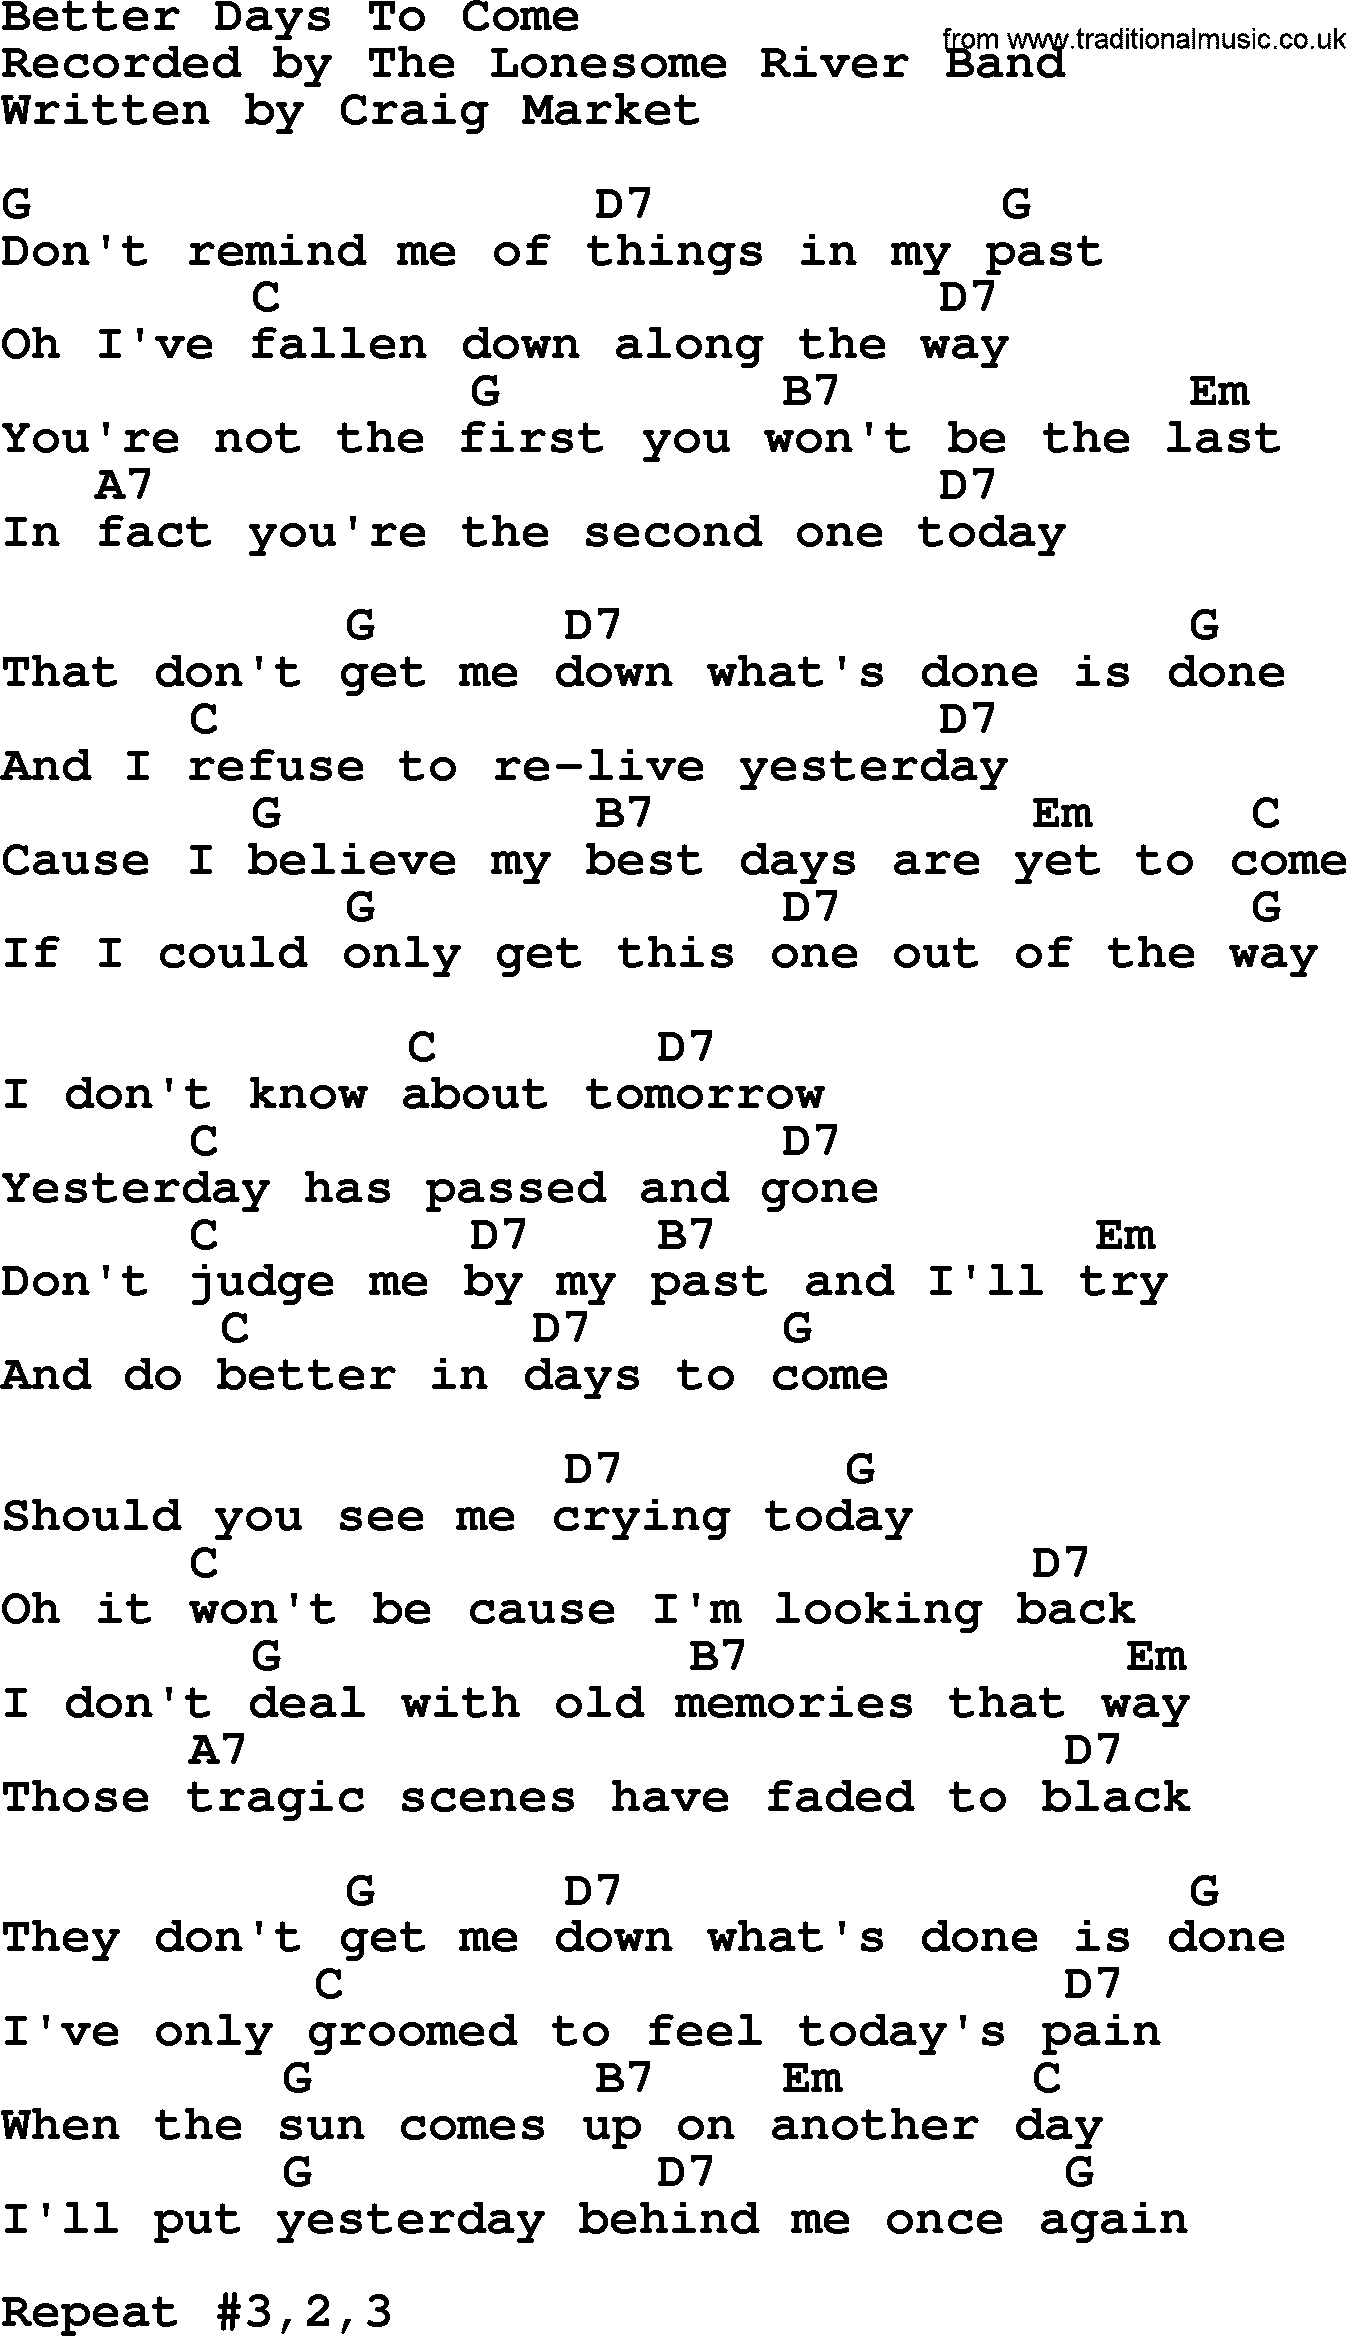 Bluegrass song: Better Days To Come, lyrics and chords